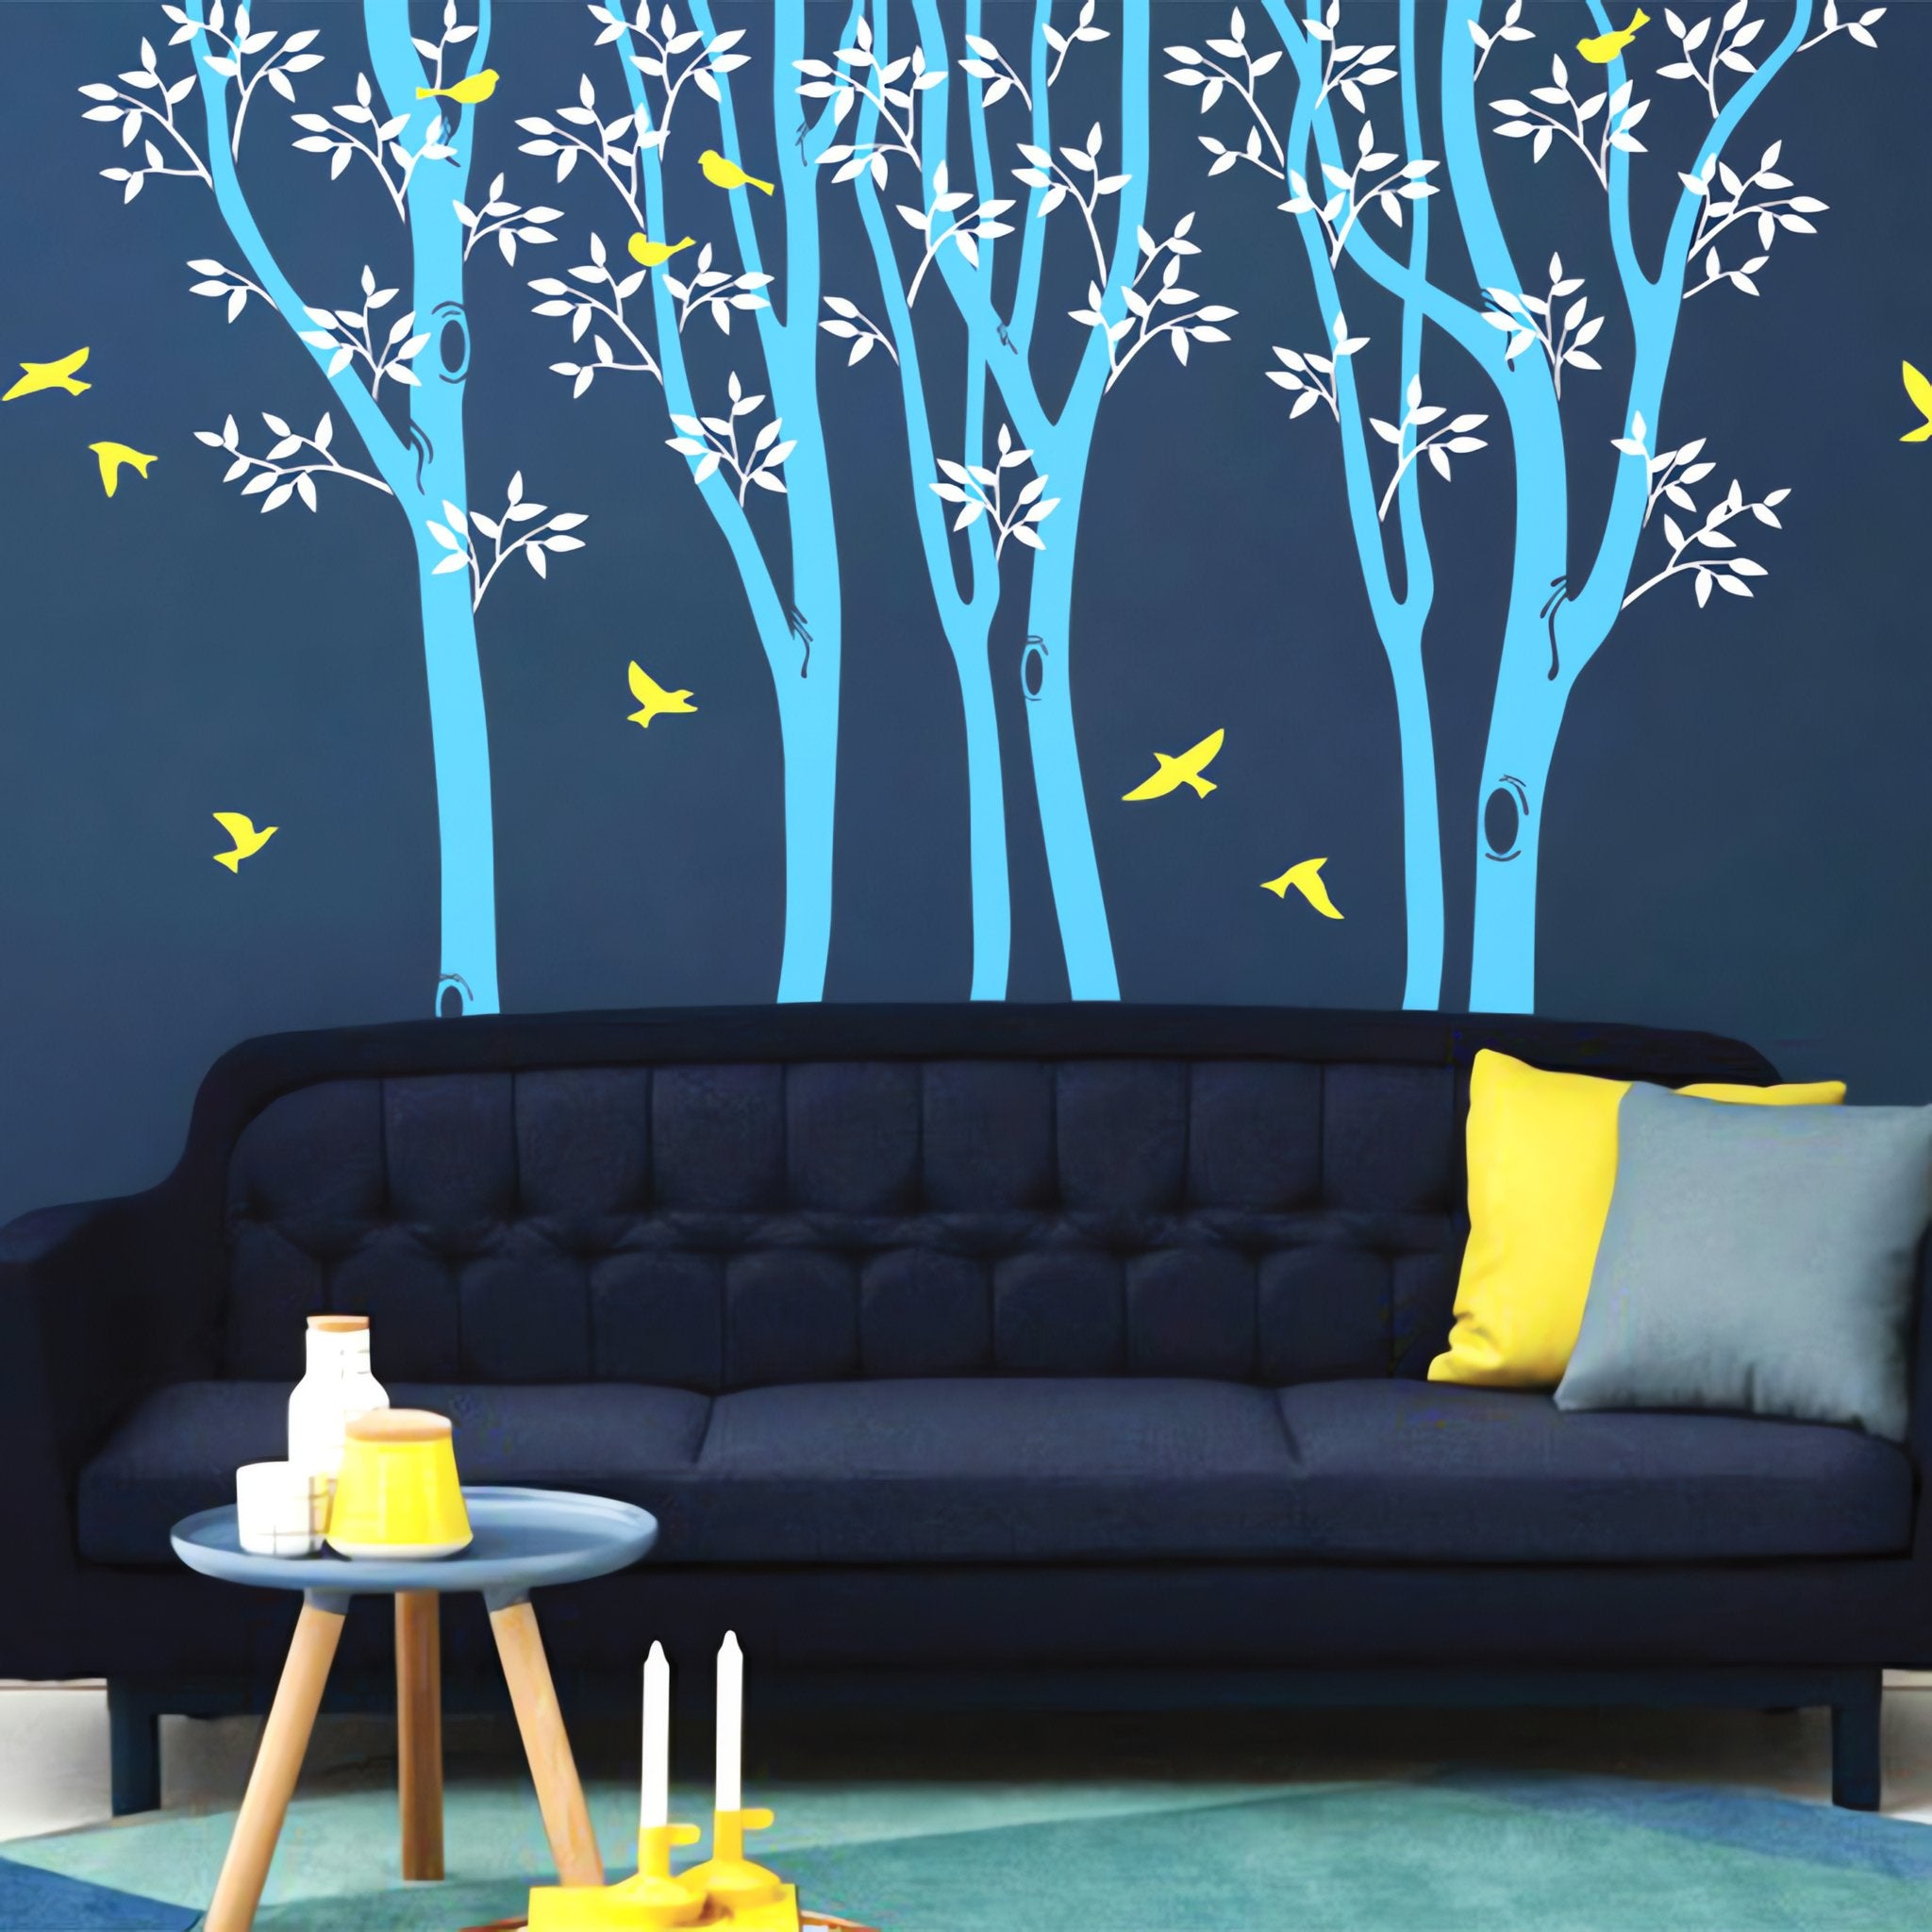 Tree wall sticker with trees and birds in a lounge with a long sofa.